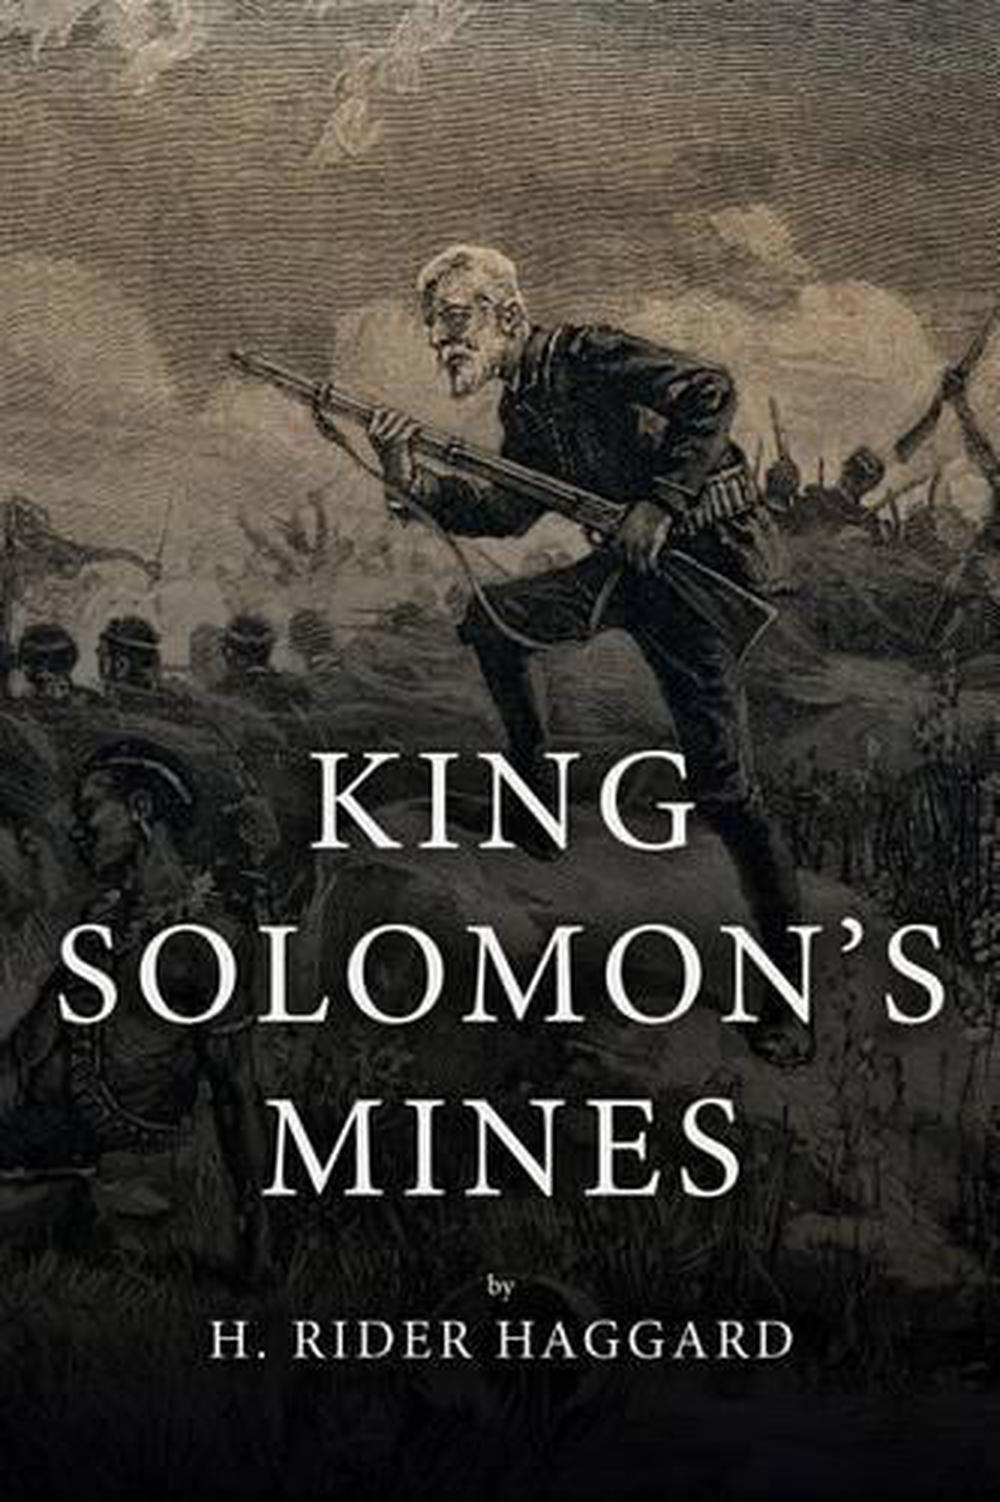 book review of king solomon mines